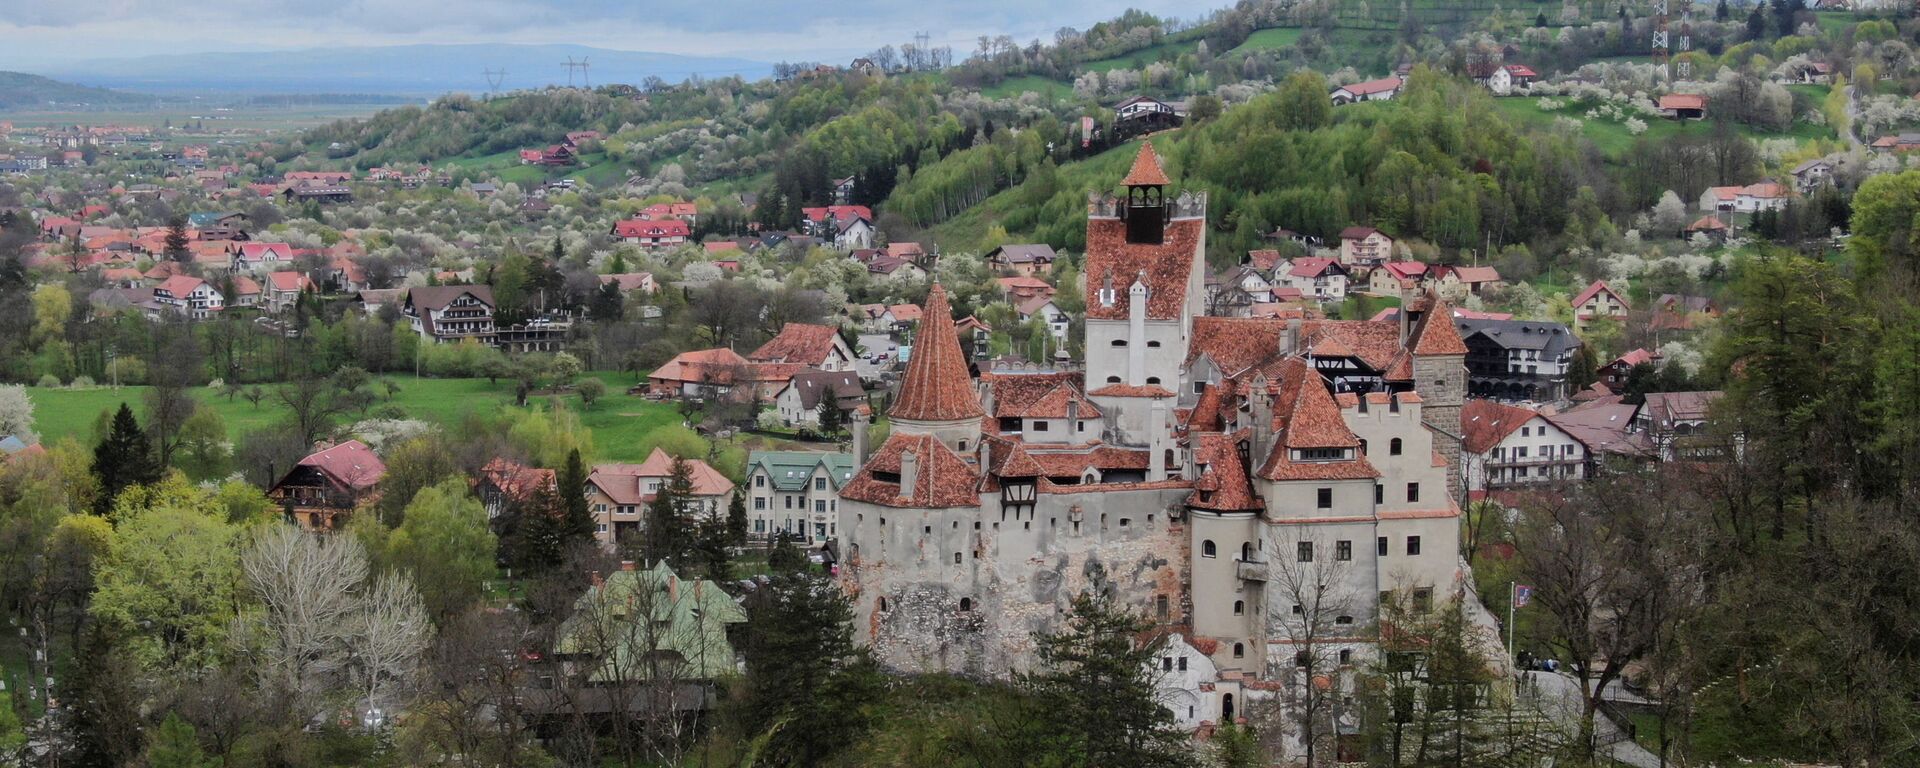 Bran Castle towers above Bran commune, in Brasov county, Romania, May 8, 2021. Picture taken with a drone.  - Sputnik International, 1920, 12.05.2021